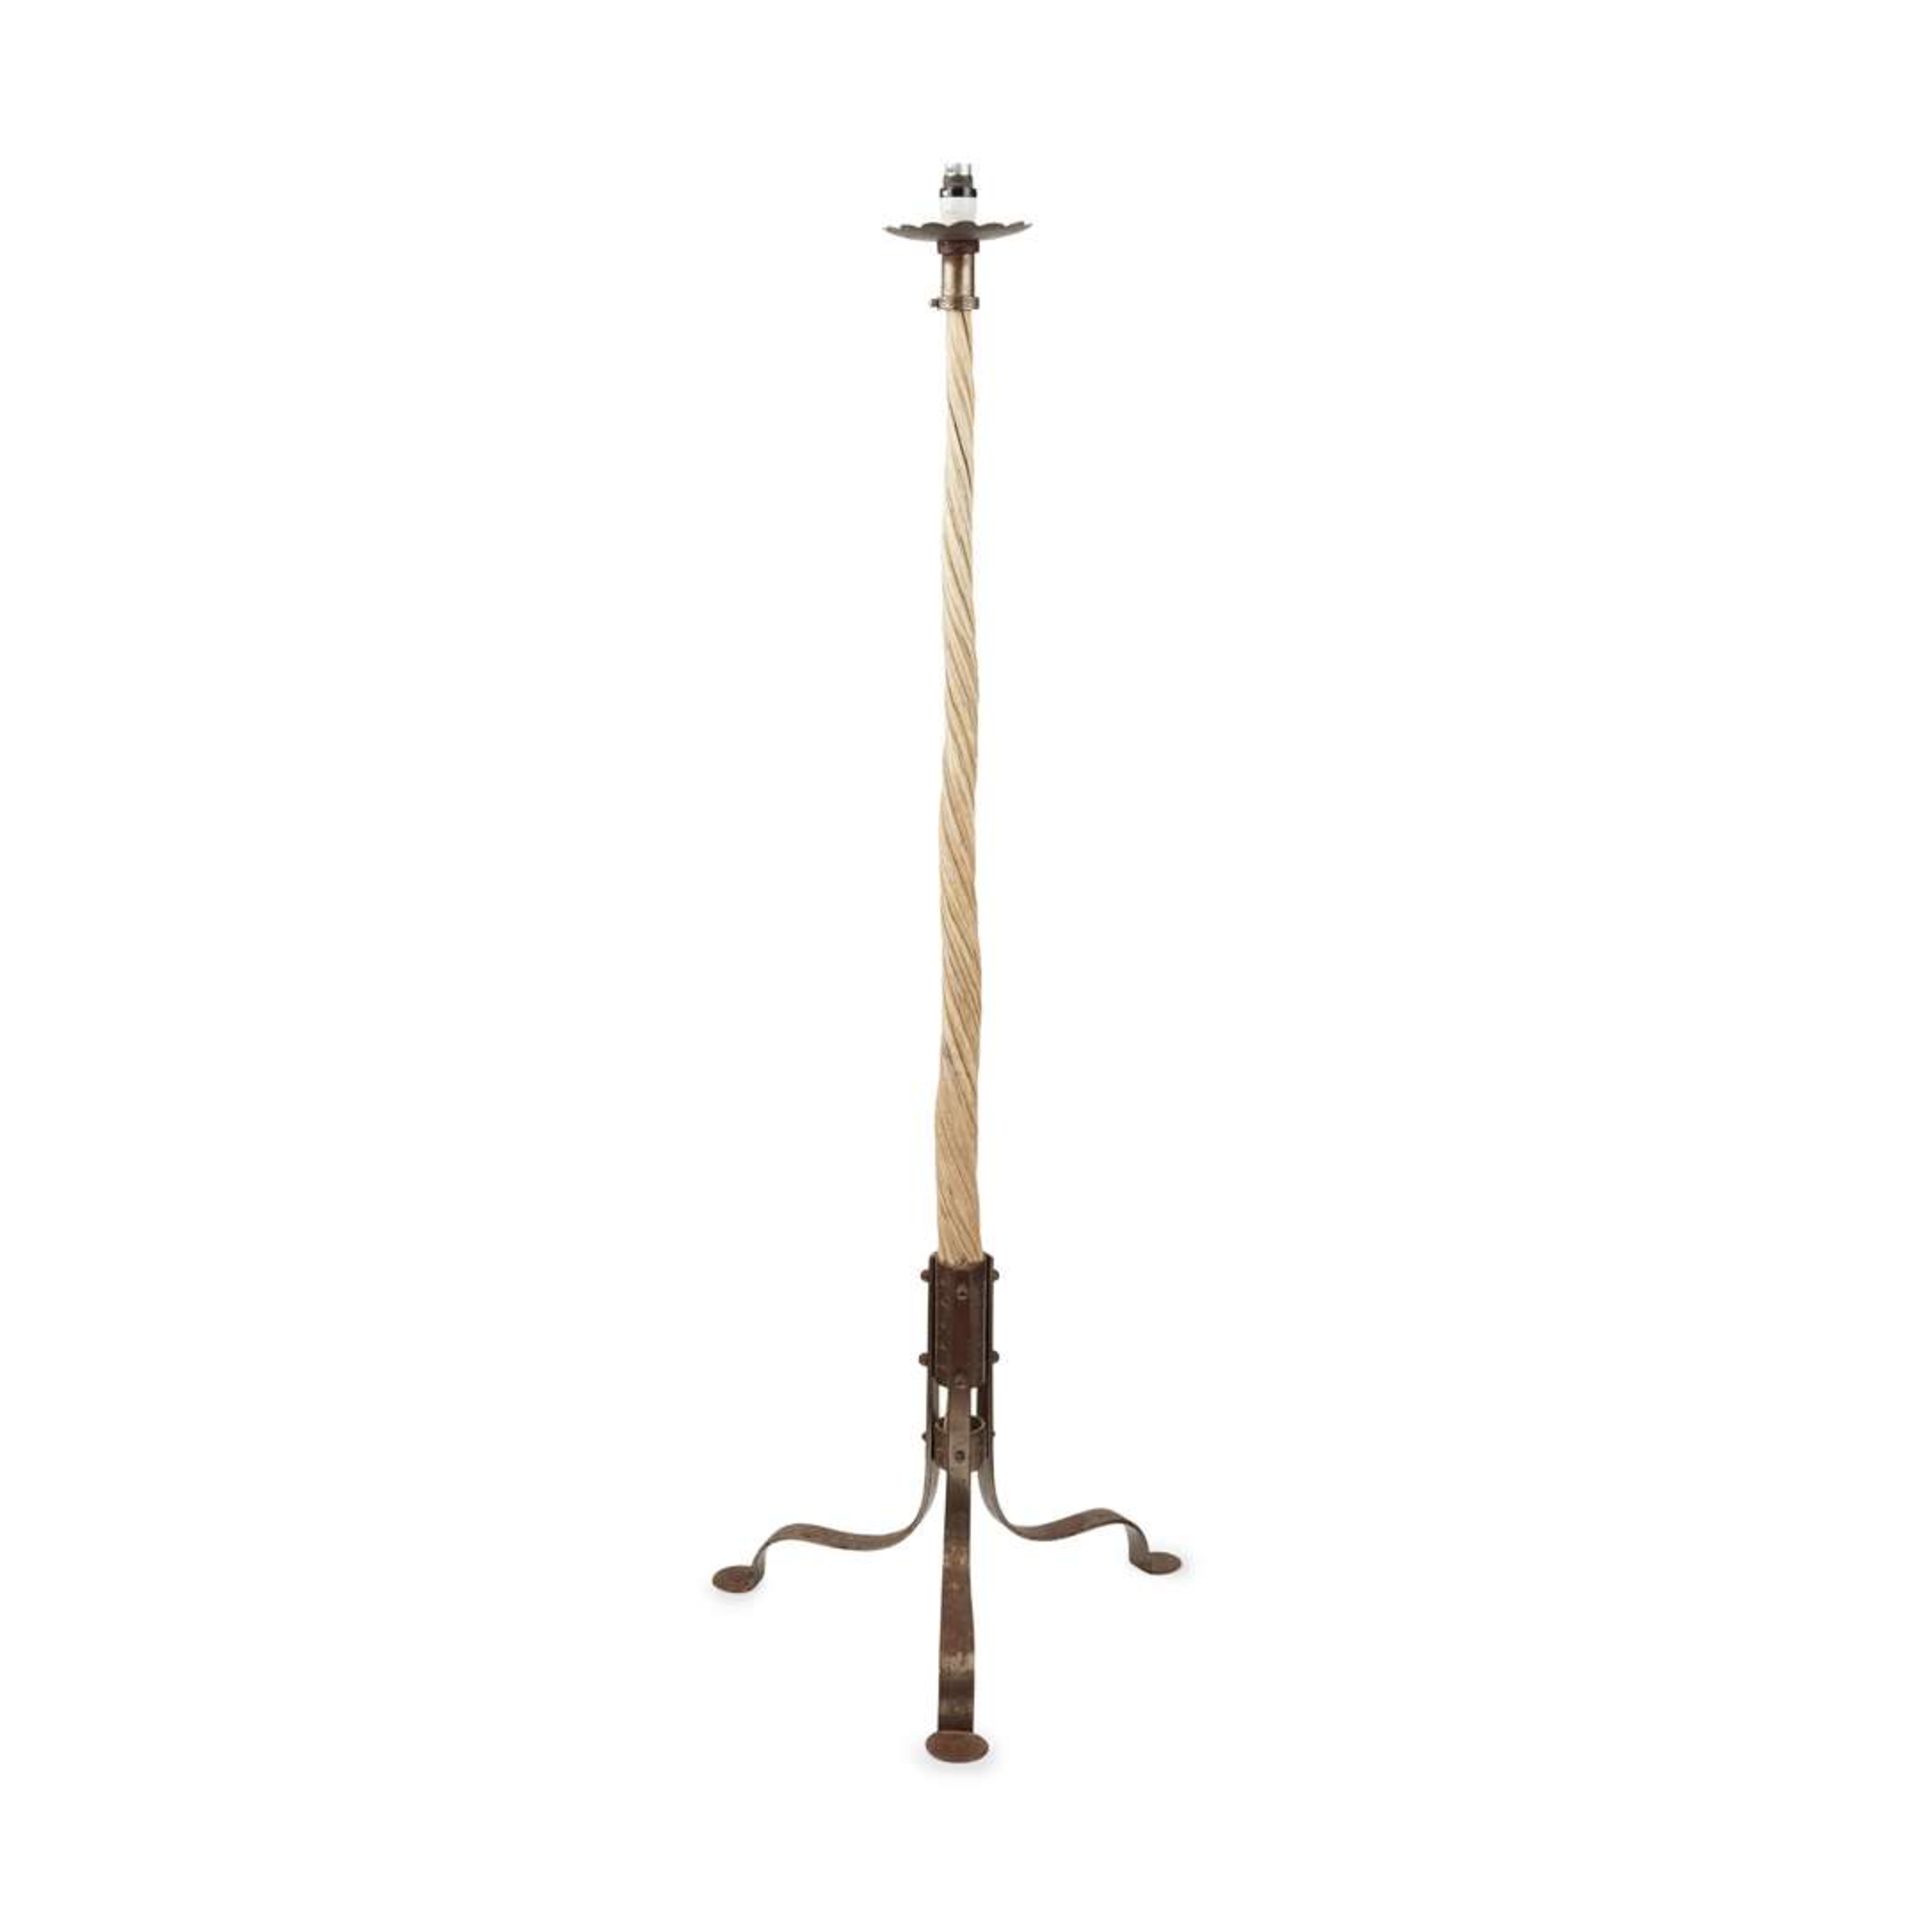 NARWHAL TUSK AND WROUGHT STEEL STANDARD LAMP - Image 2 of 2